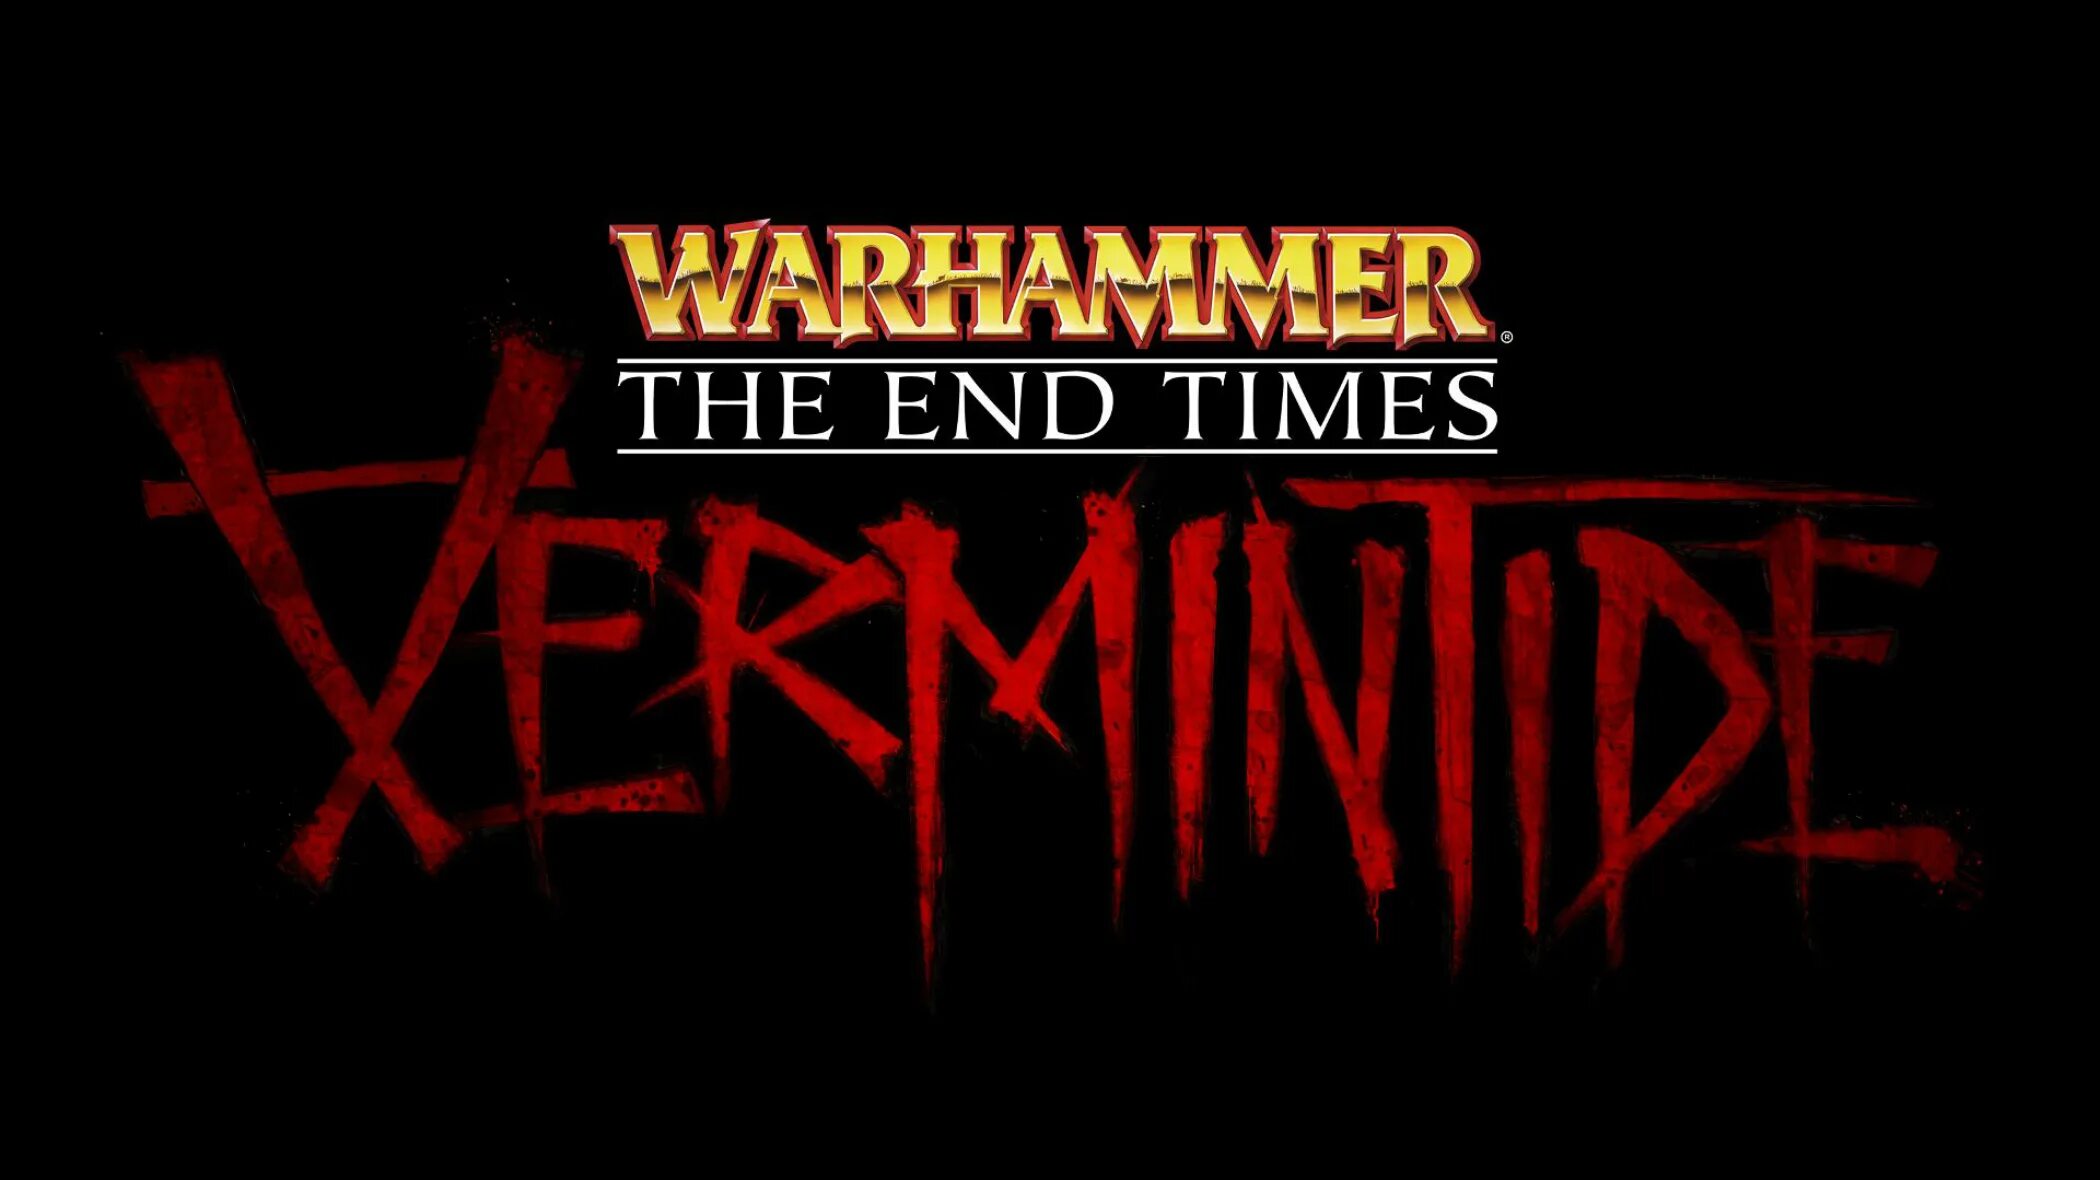 When the game ends. Warhammer: end times - Vermintide. Warhammer end times Vermintide logo. Warhammer: end times - Vermintide обои. Warhammer: Vermintide end times игра обои.